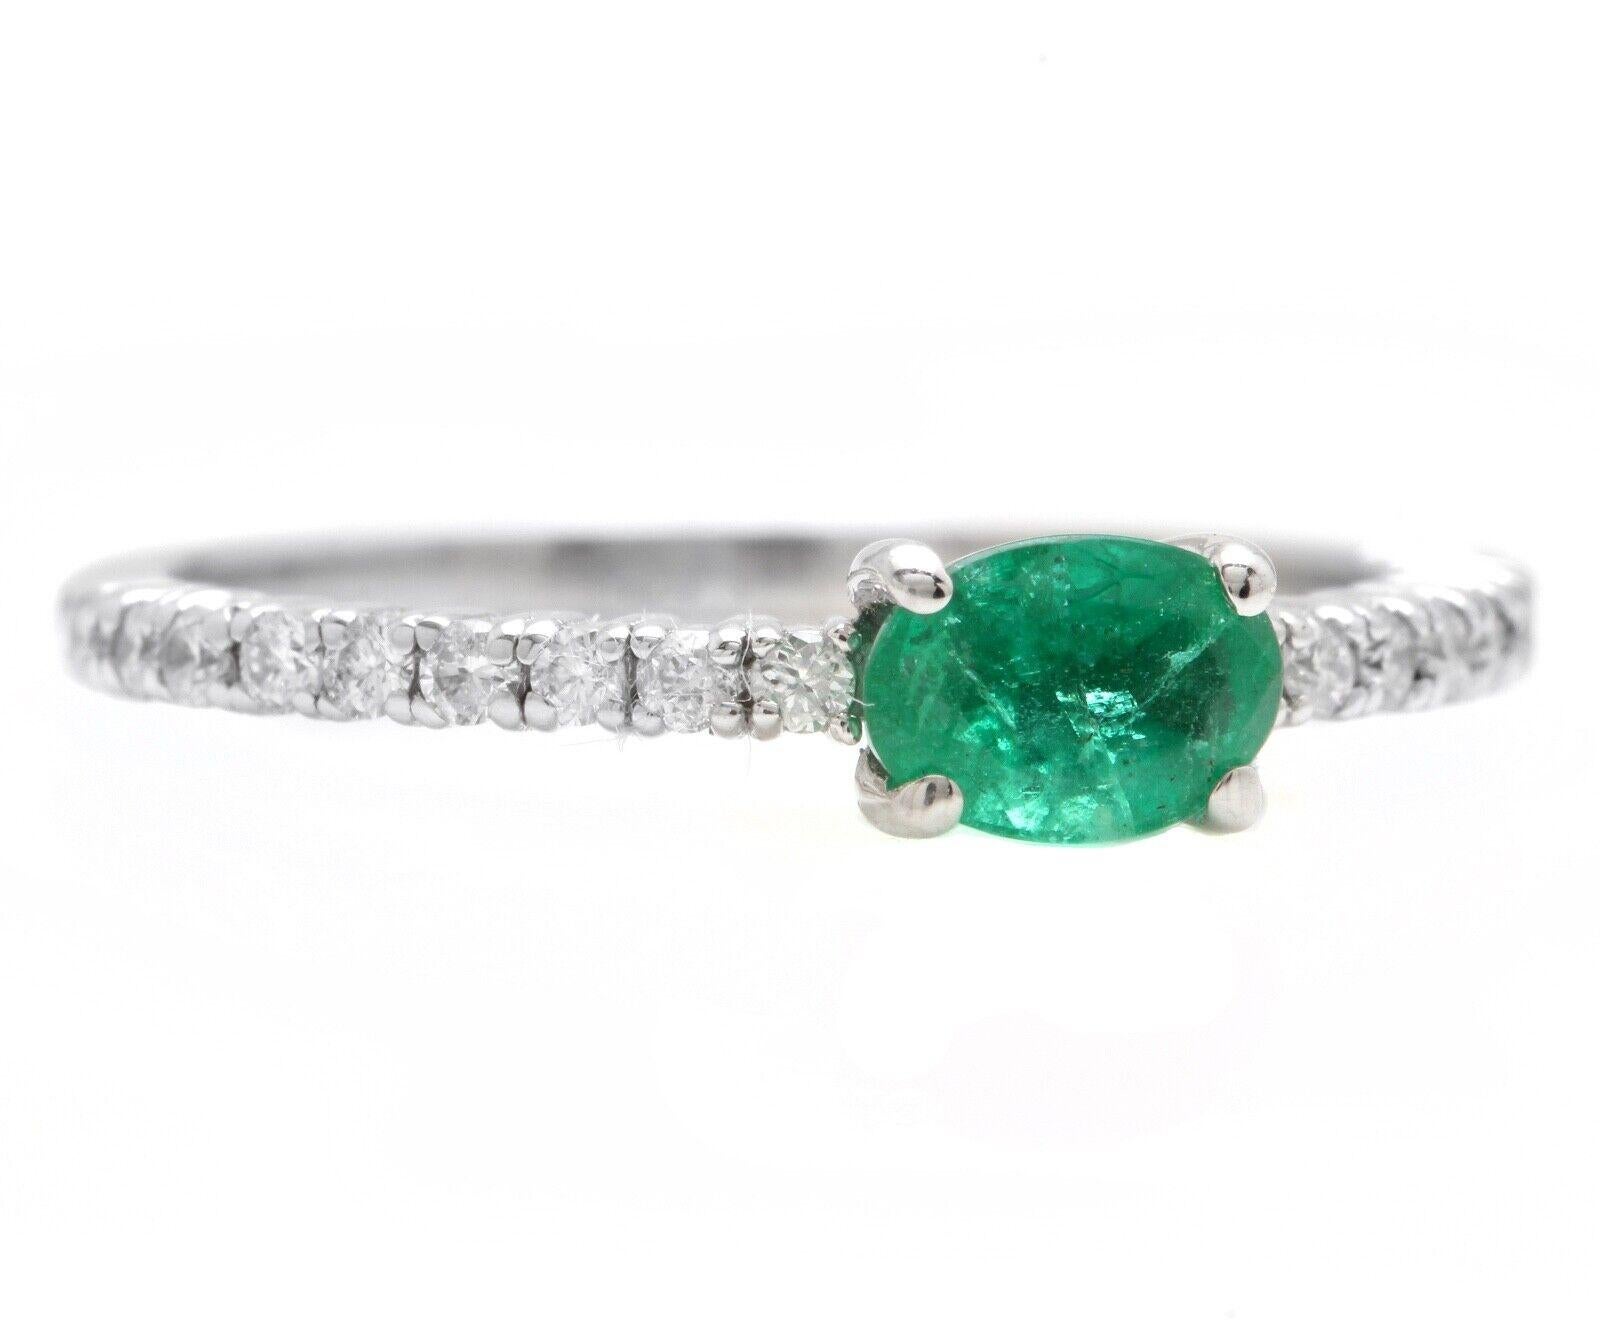 0.70 Carats Natural Emerald and Diamond 14K Solid White Gold Ring

Suggested Replacement Value: $3,000.00

Total Natural Green Emerald Weight is: Approx. 0.50 Carats 

Natural Round Diamonds Weight: Approx. 0.20 Carats (color G-H / Clarity SI)

Ring